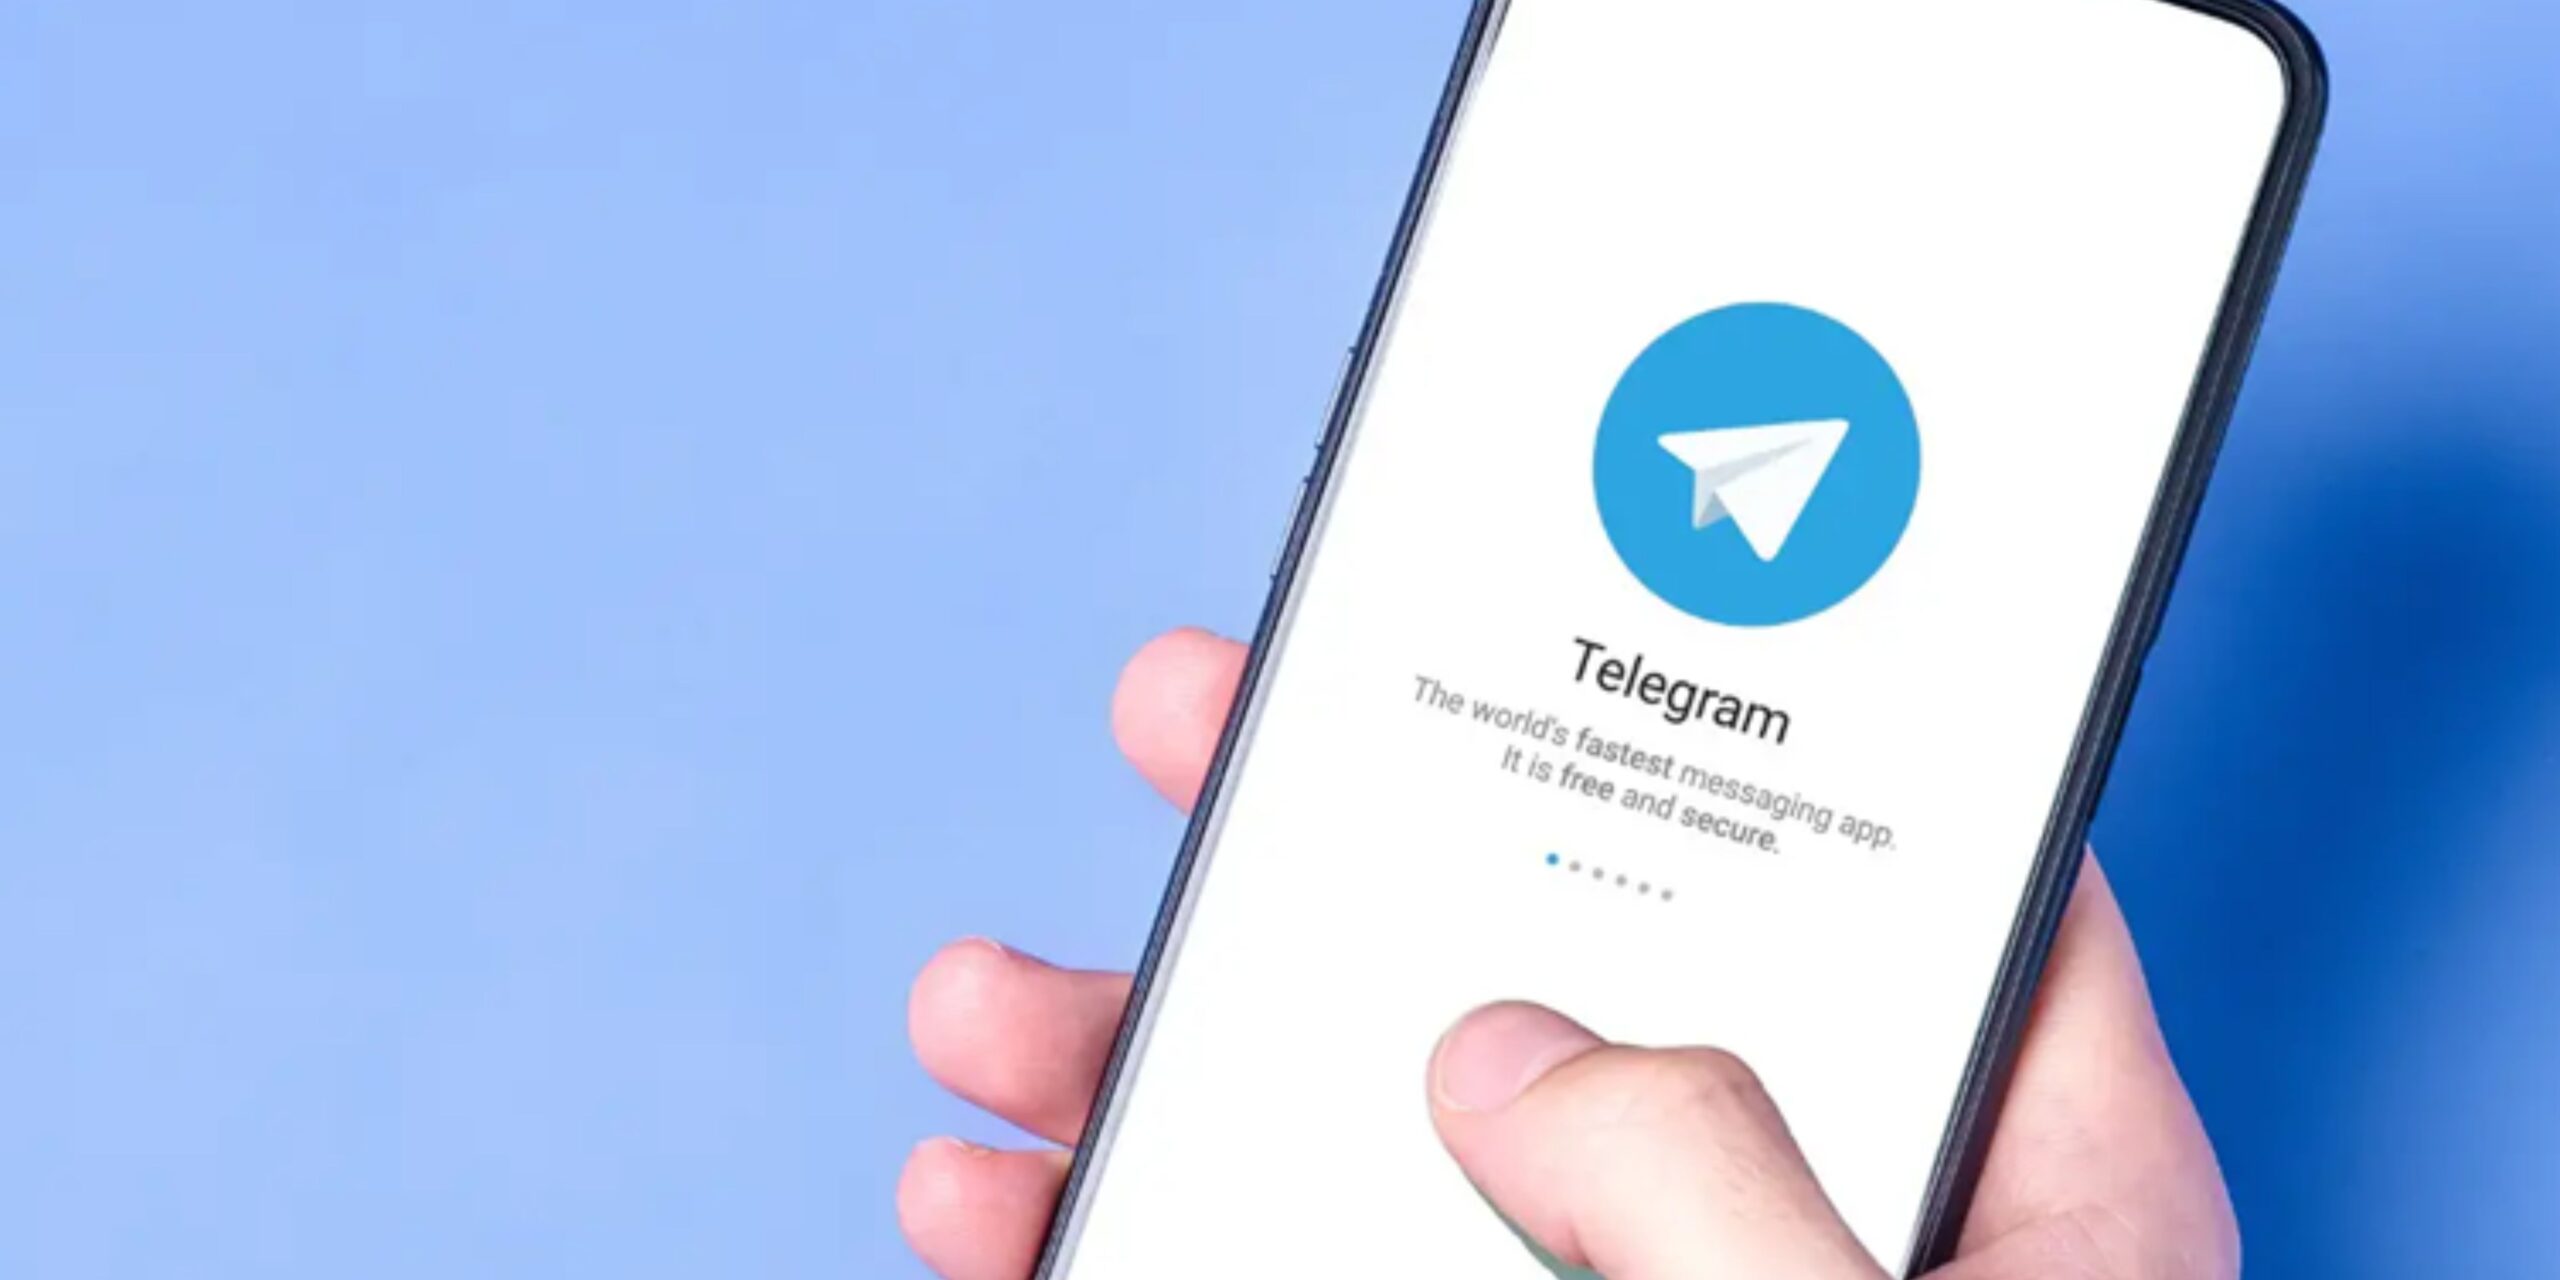 Know more about Telegram leaks and their prevention